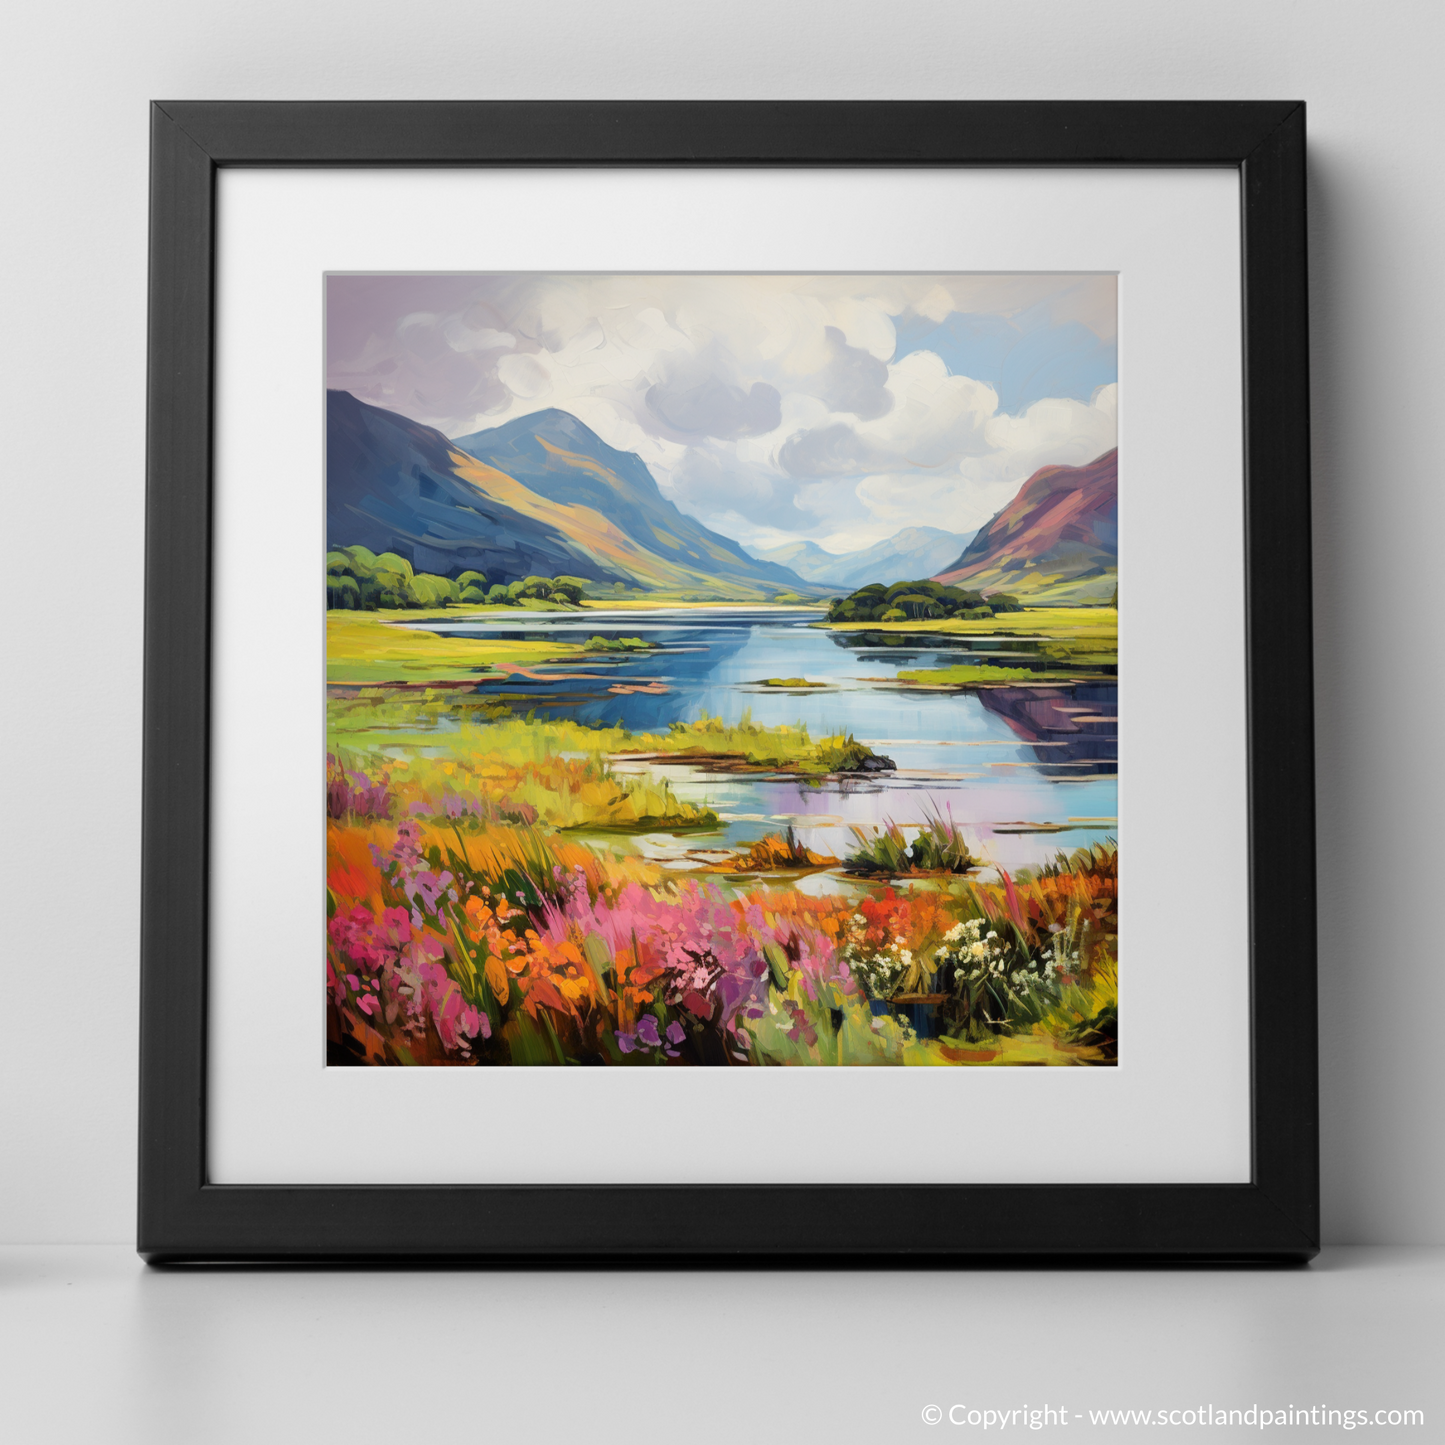 Art Print of Loch Leven, Highlands in summer with a black frame